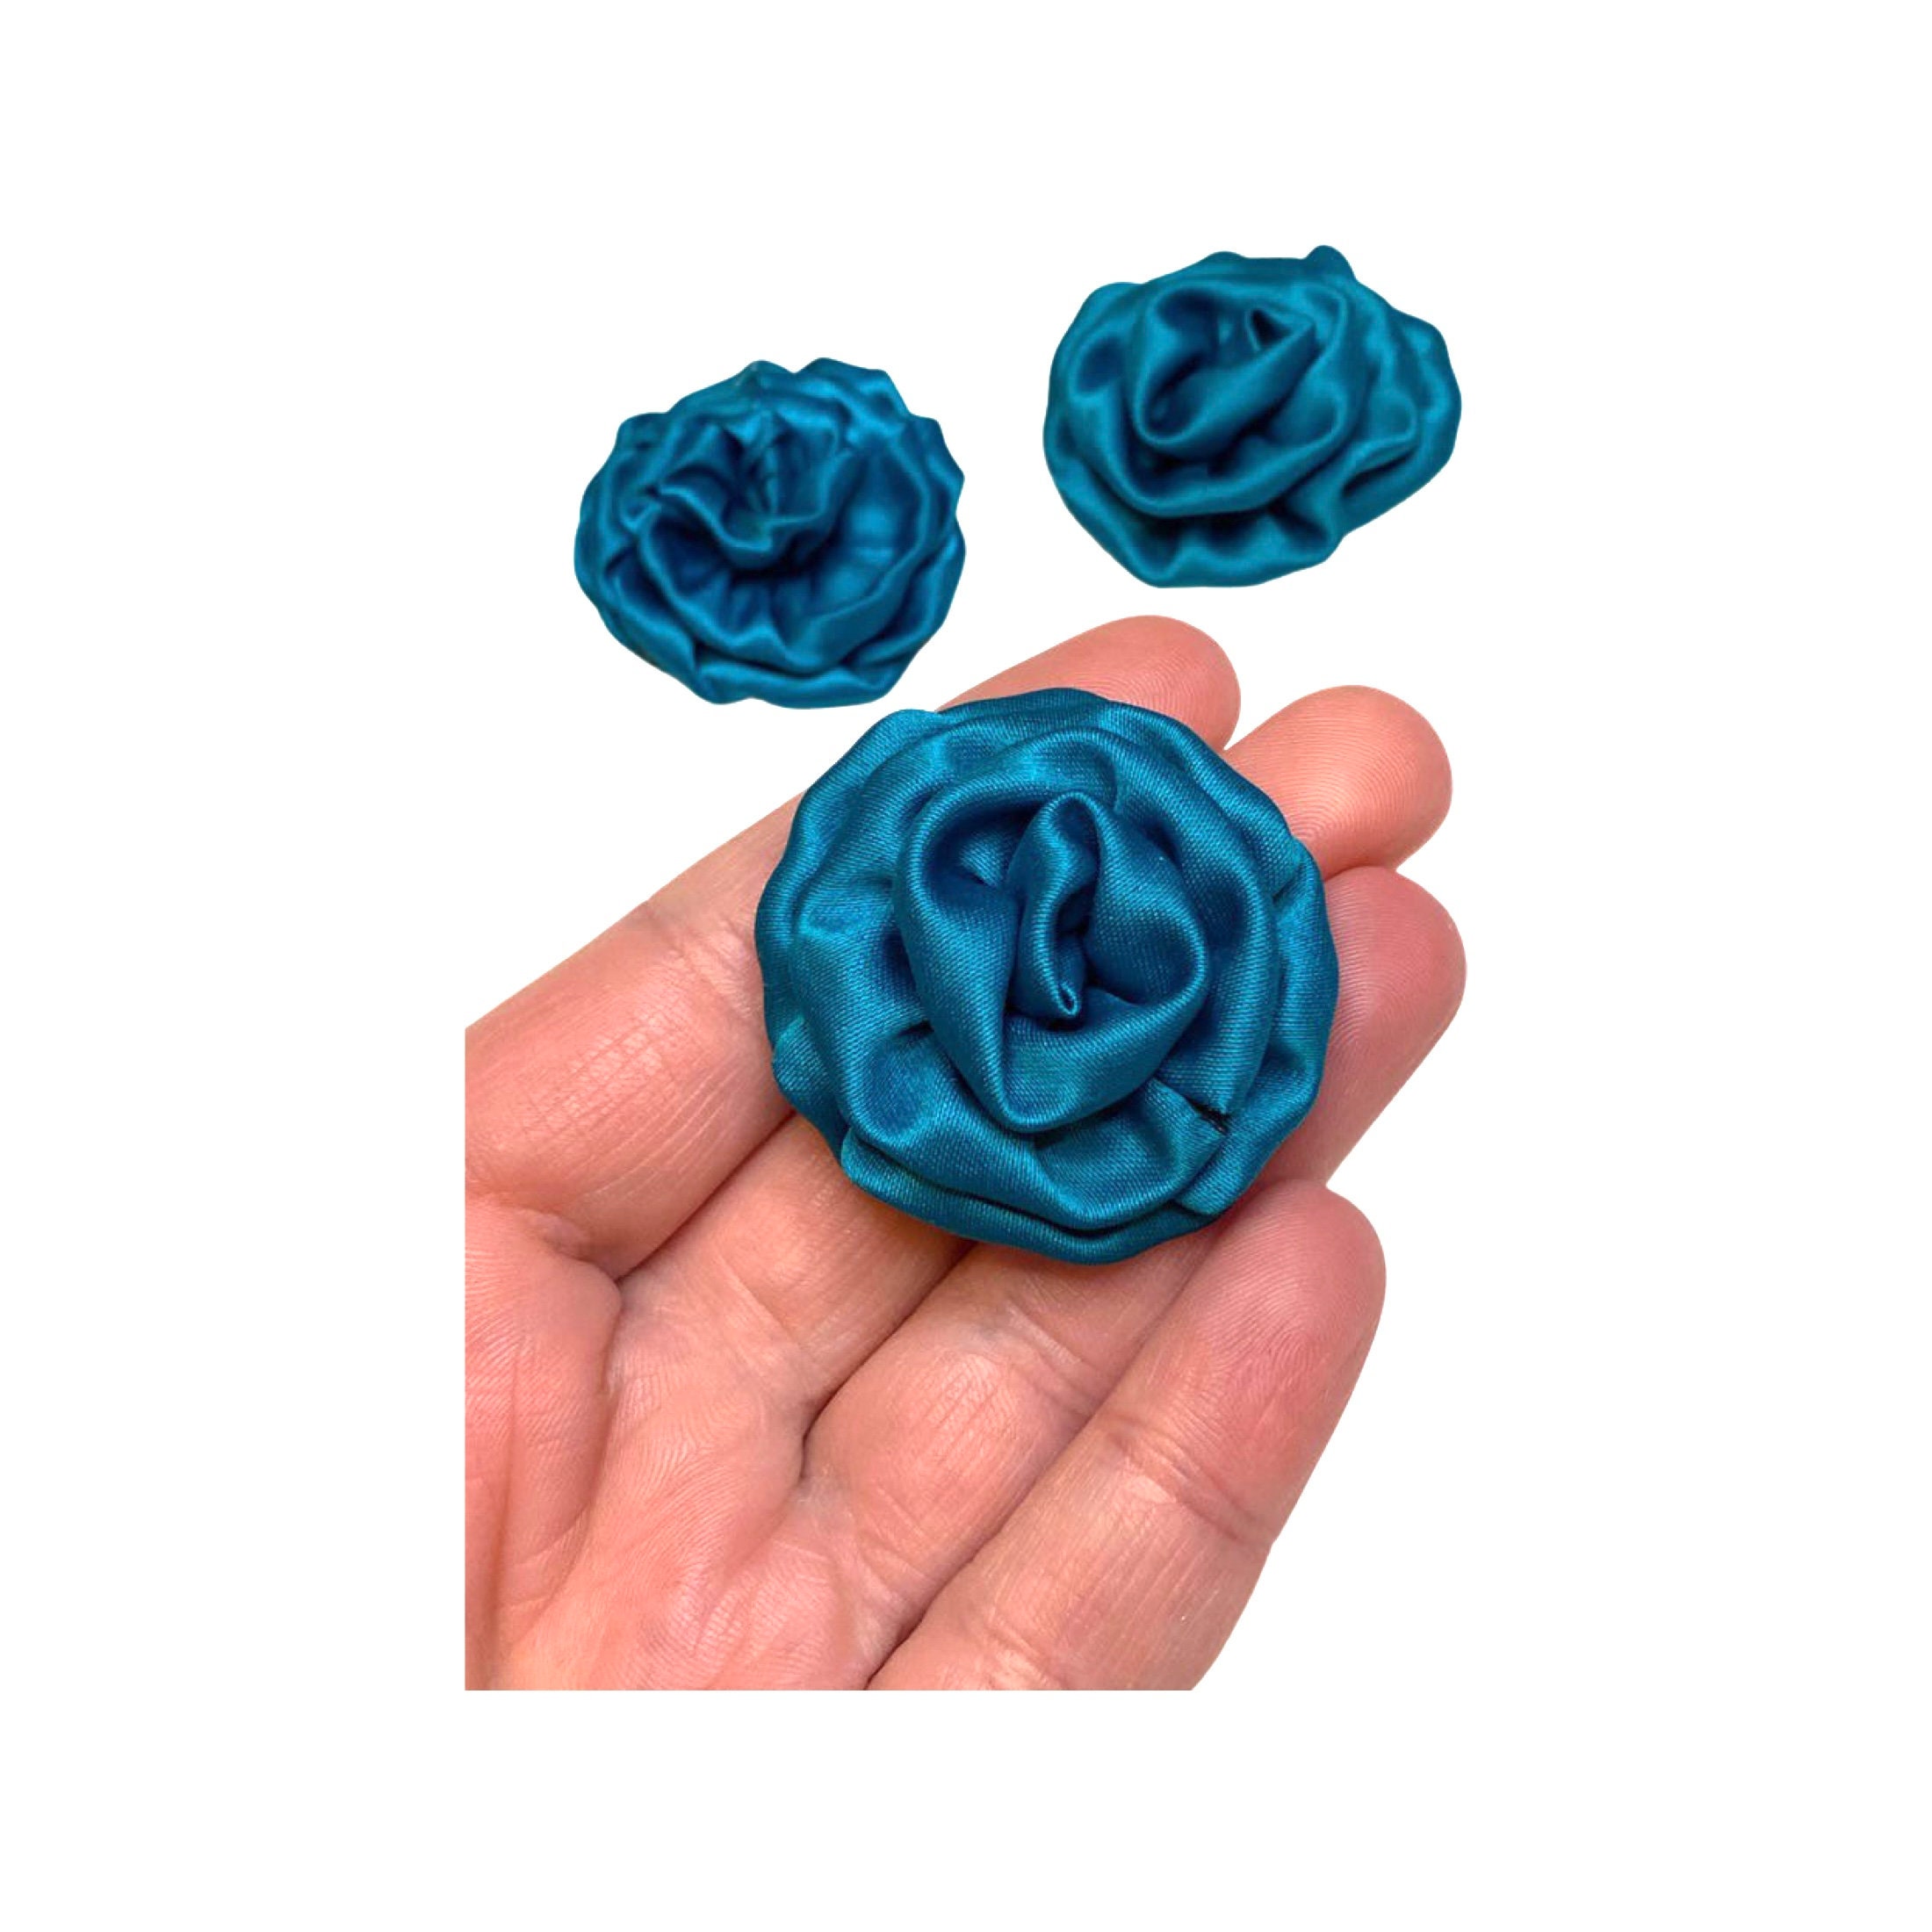 Teal 1.5 Round Satin Rolled Rose Fabric Flower DIY Baby - Etsy